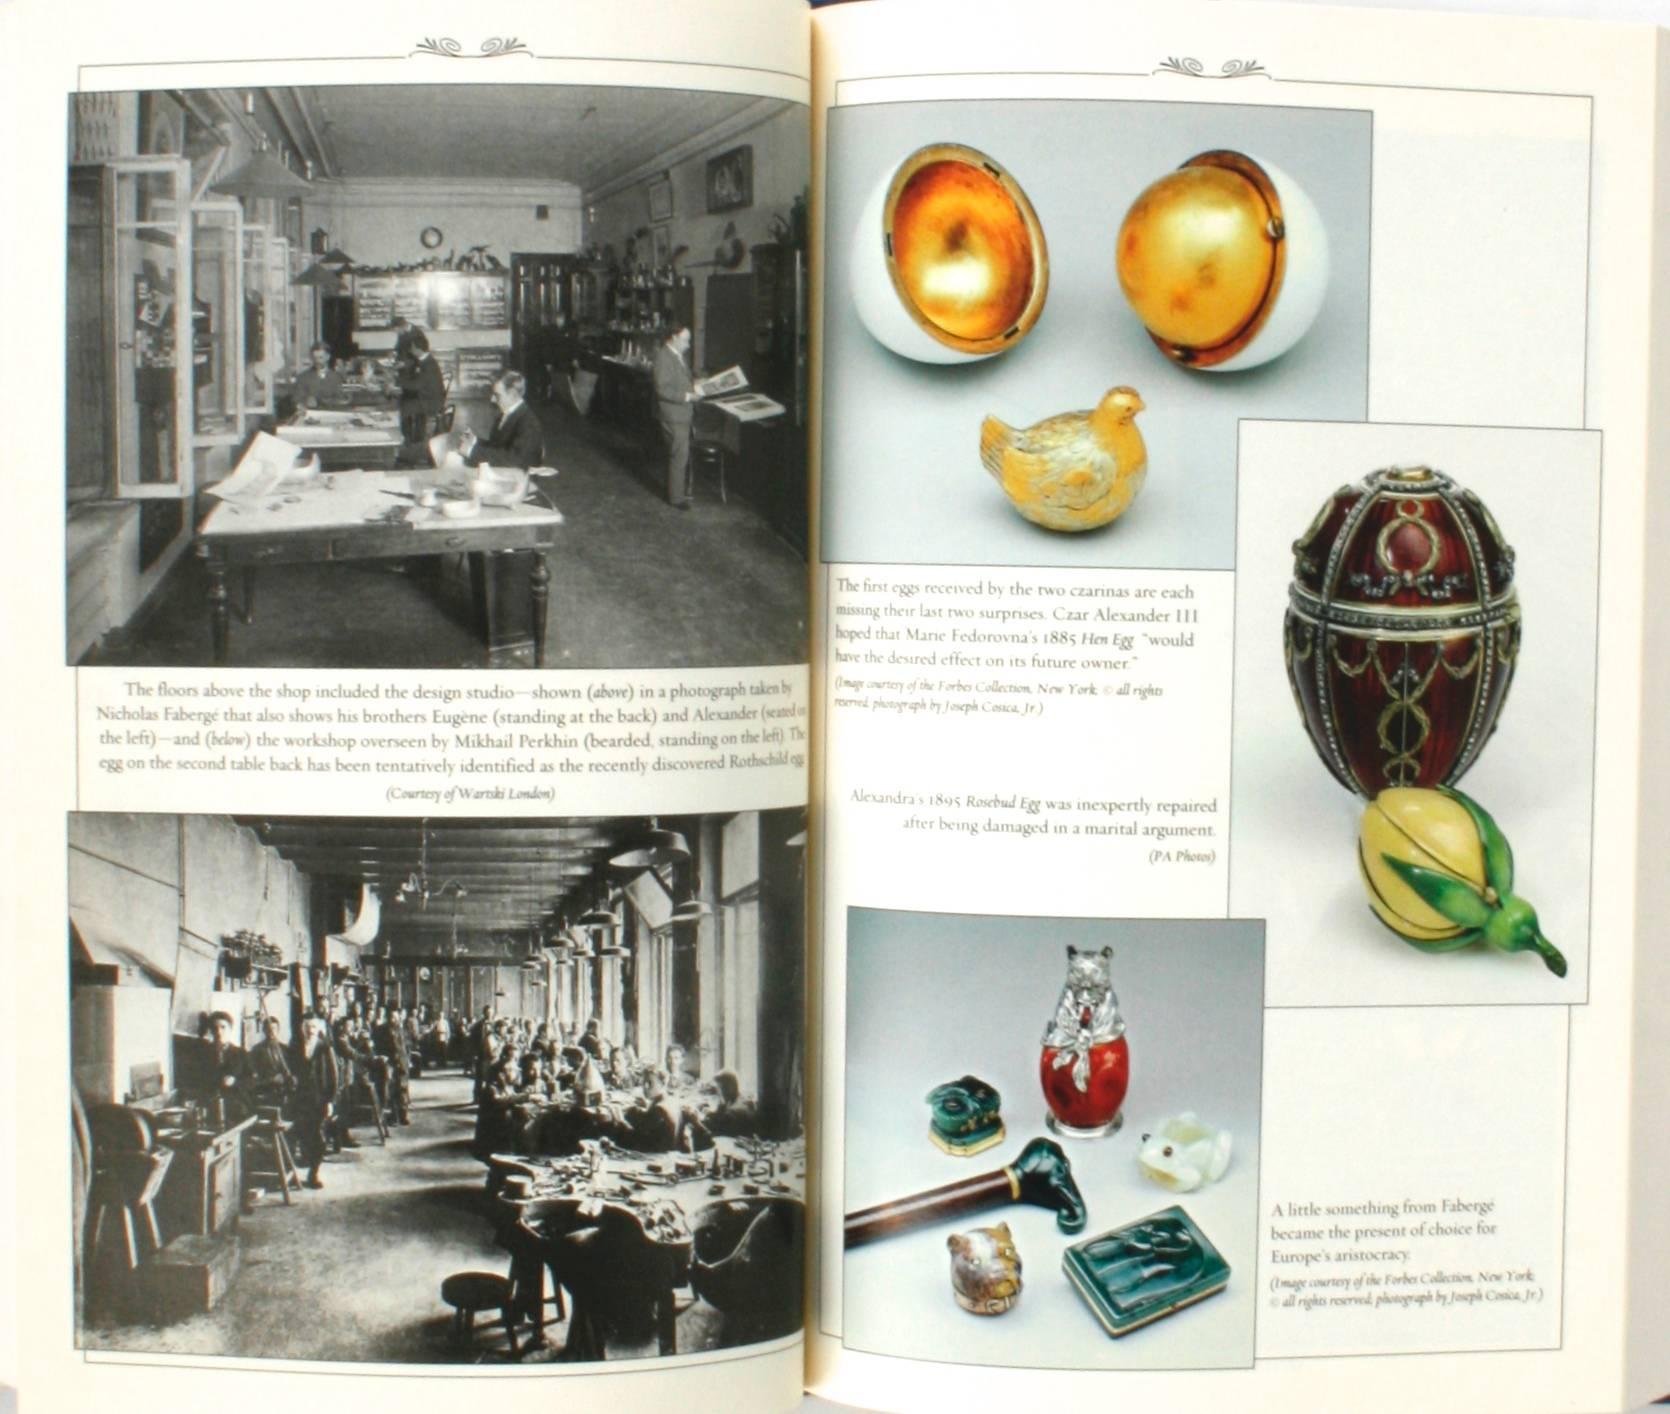 American Fabergé's Eggs by Toby Faber, First Edition